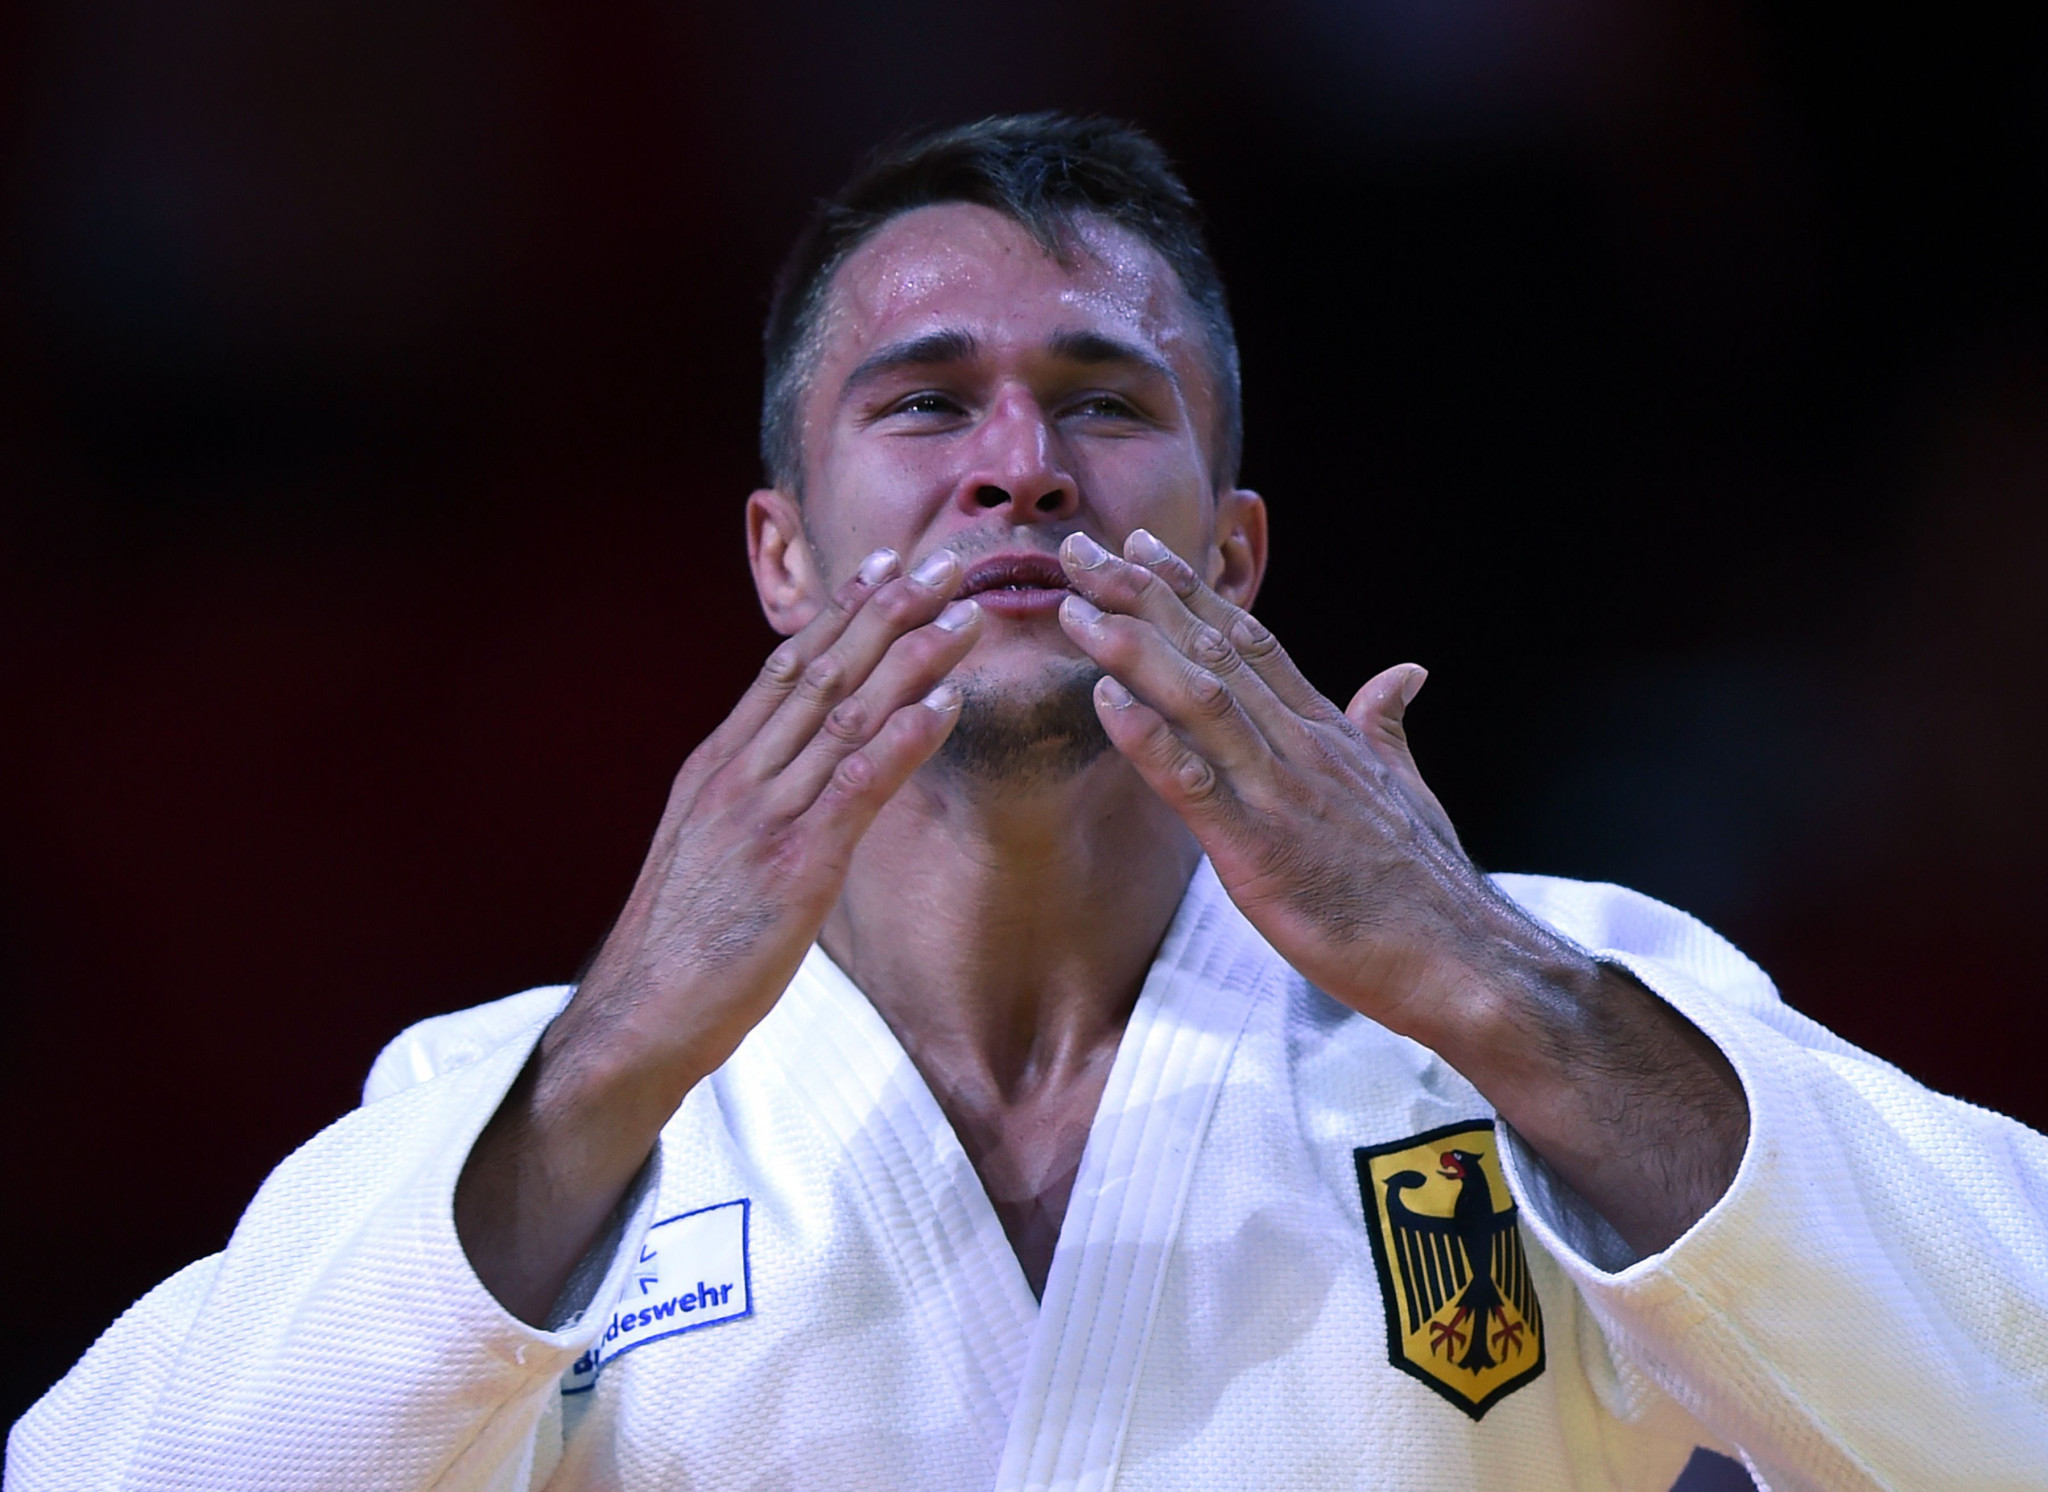 Alexander Wieczerzak was visibly emotional when his victory was confirmed ©Getty Images